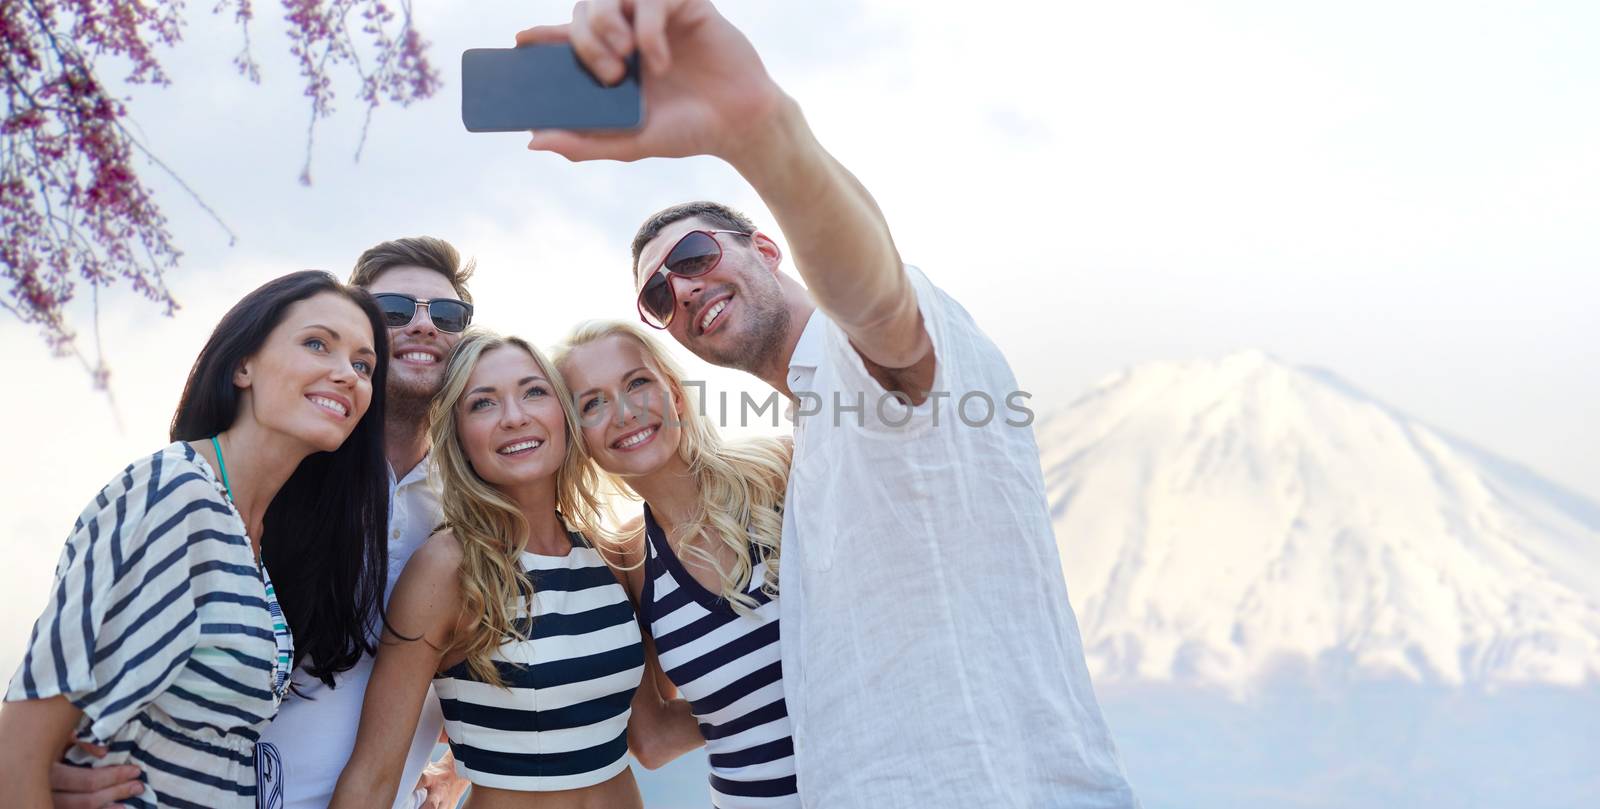 summer, asia, tourism, technology and people concept - group of smiling friends taking selfie with smartphone over fudjiyama mountain background